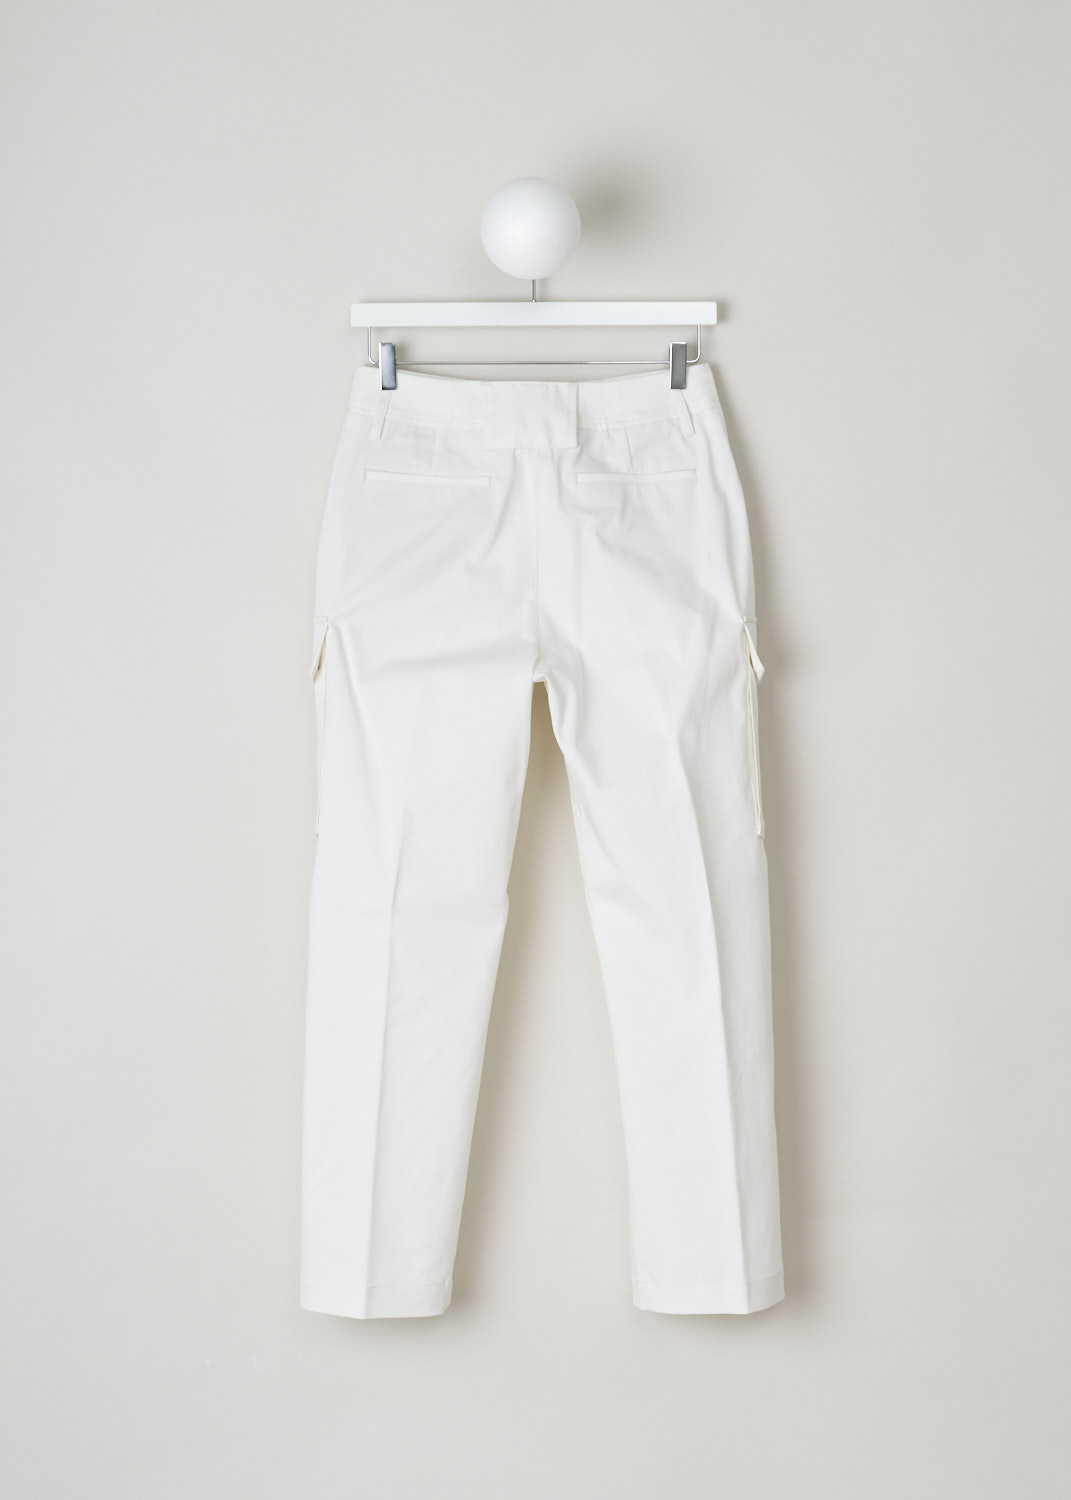 Closed, Wide fitted flat front chino, clea_C91597_30T_22_218, white, back, A white chino cut in the flat front model with a wide fit. Featuring forward slated pockets on the front and welted pockets on the back. Further decorating the front is a functional cargo pocket.